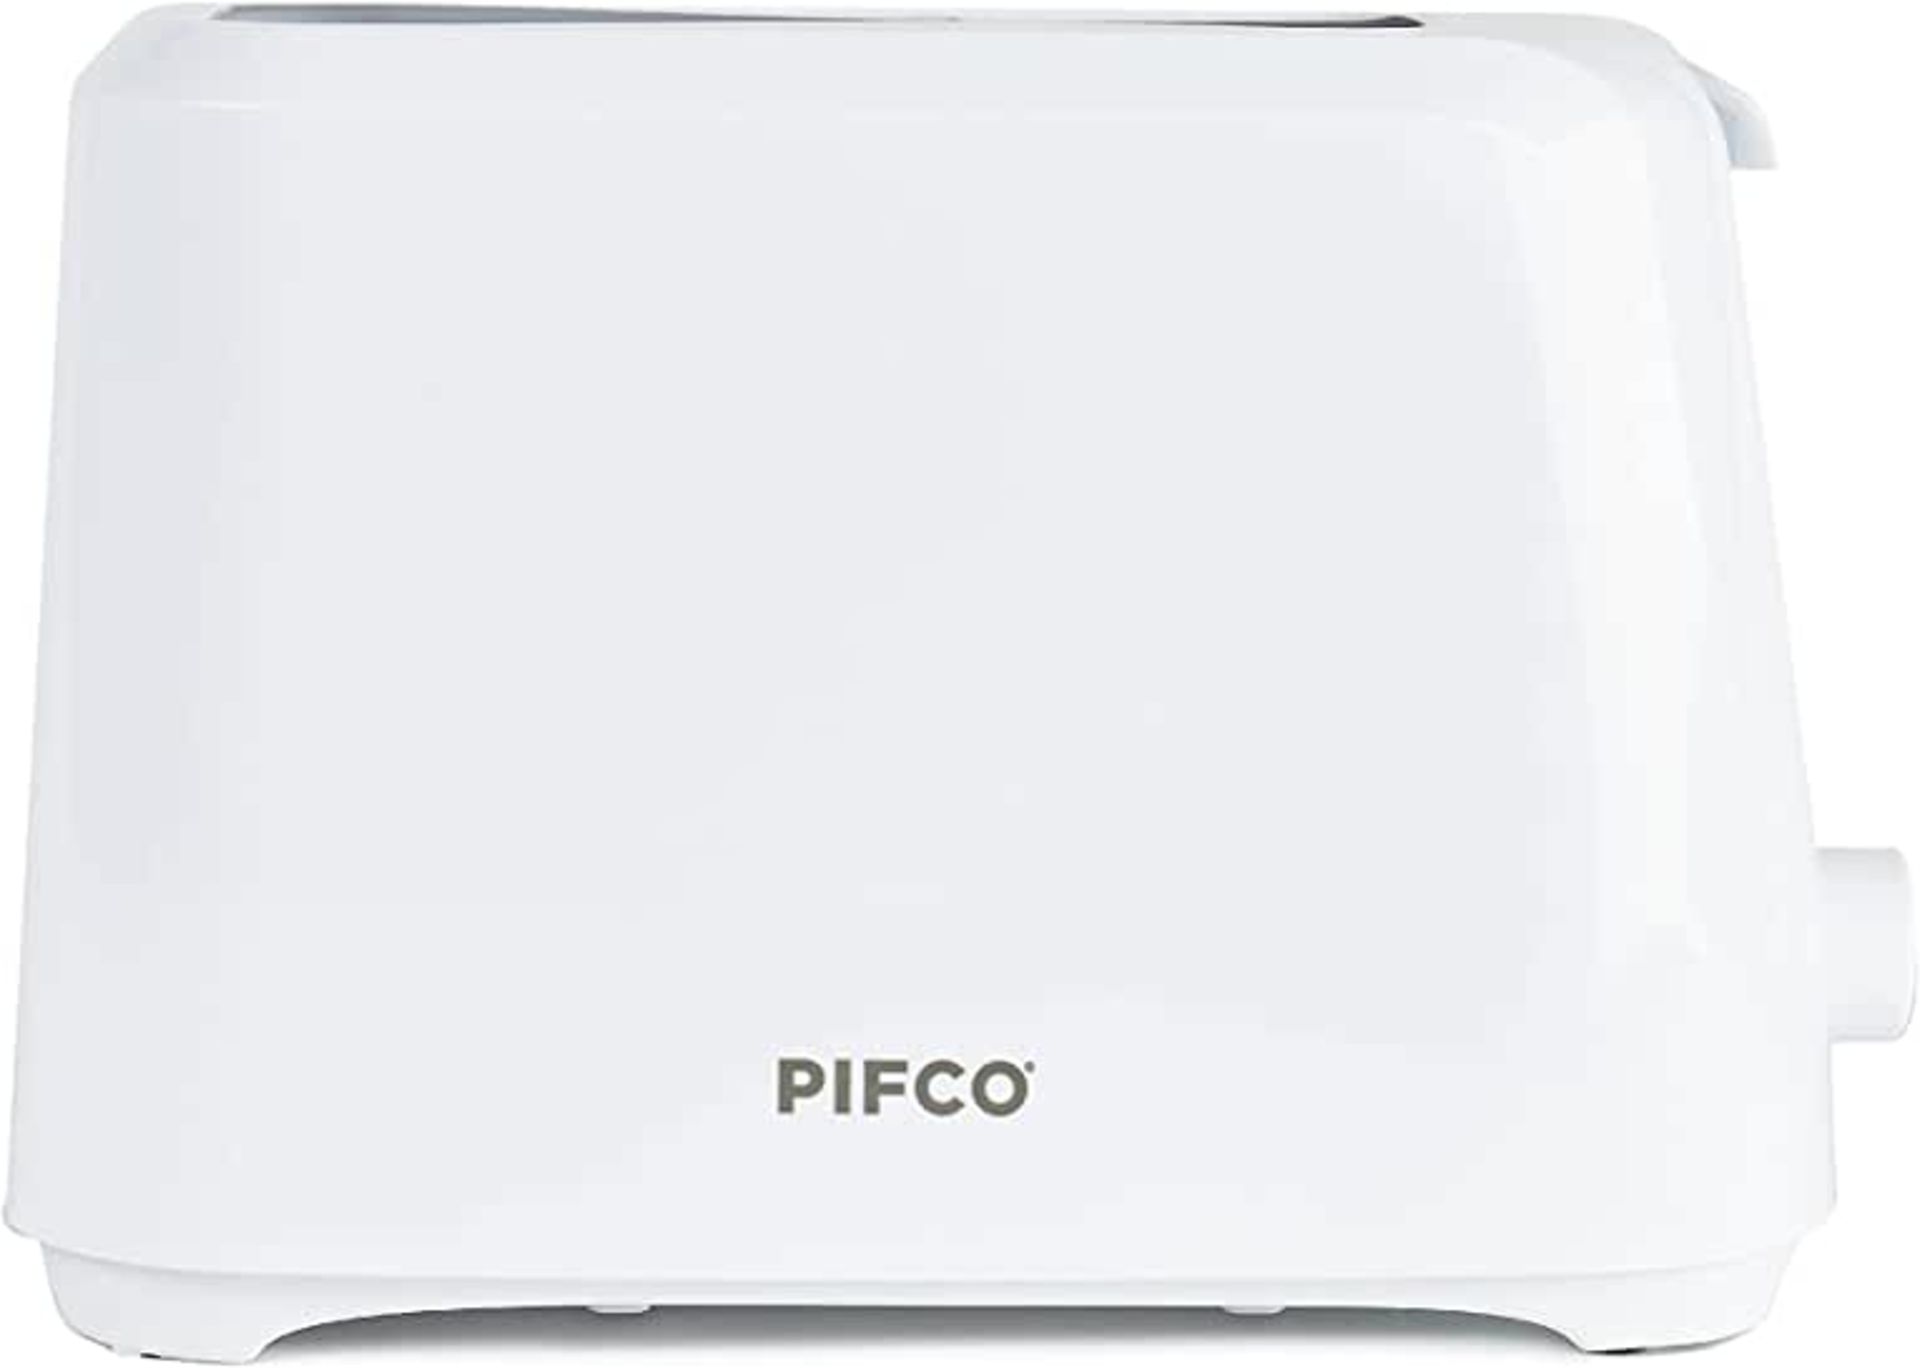 RRP-£16 PIFCOÂ® Essentials White 2 Slice Toaster - Compact Design with 6 browning controls - Anti-Ja